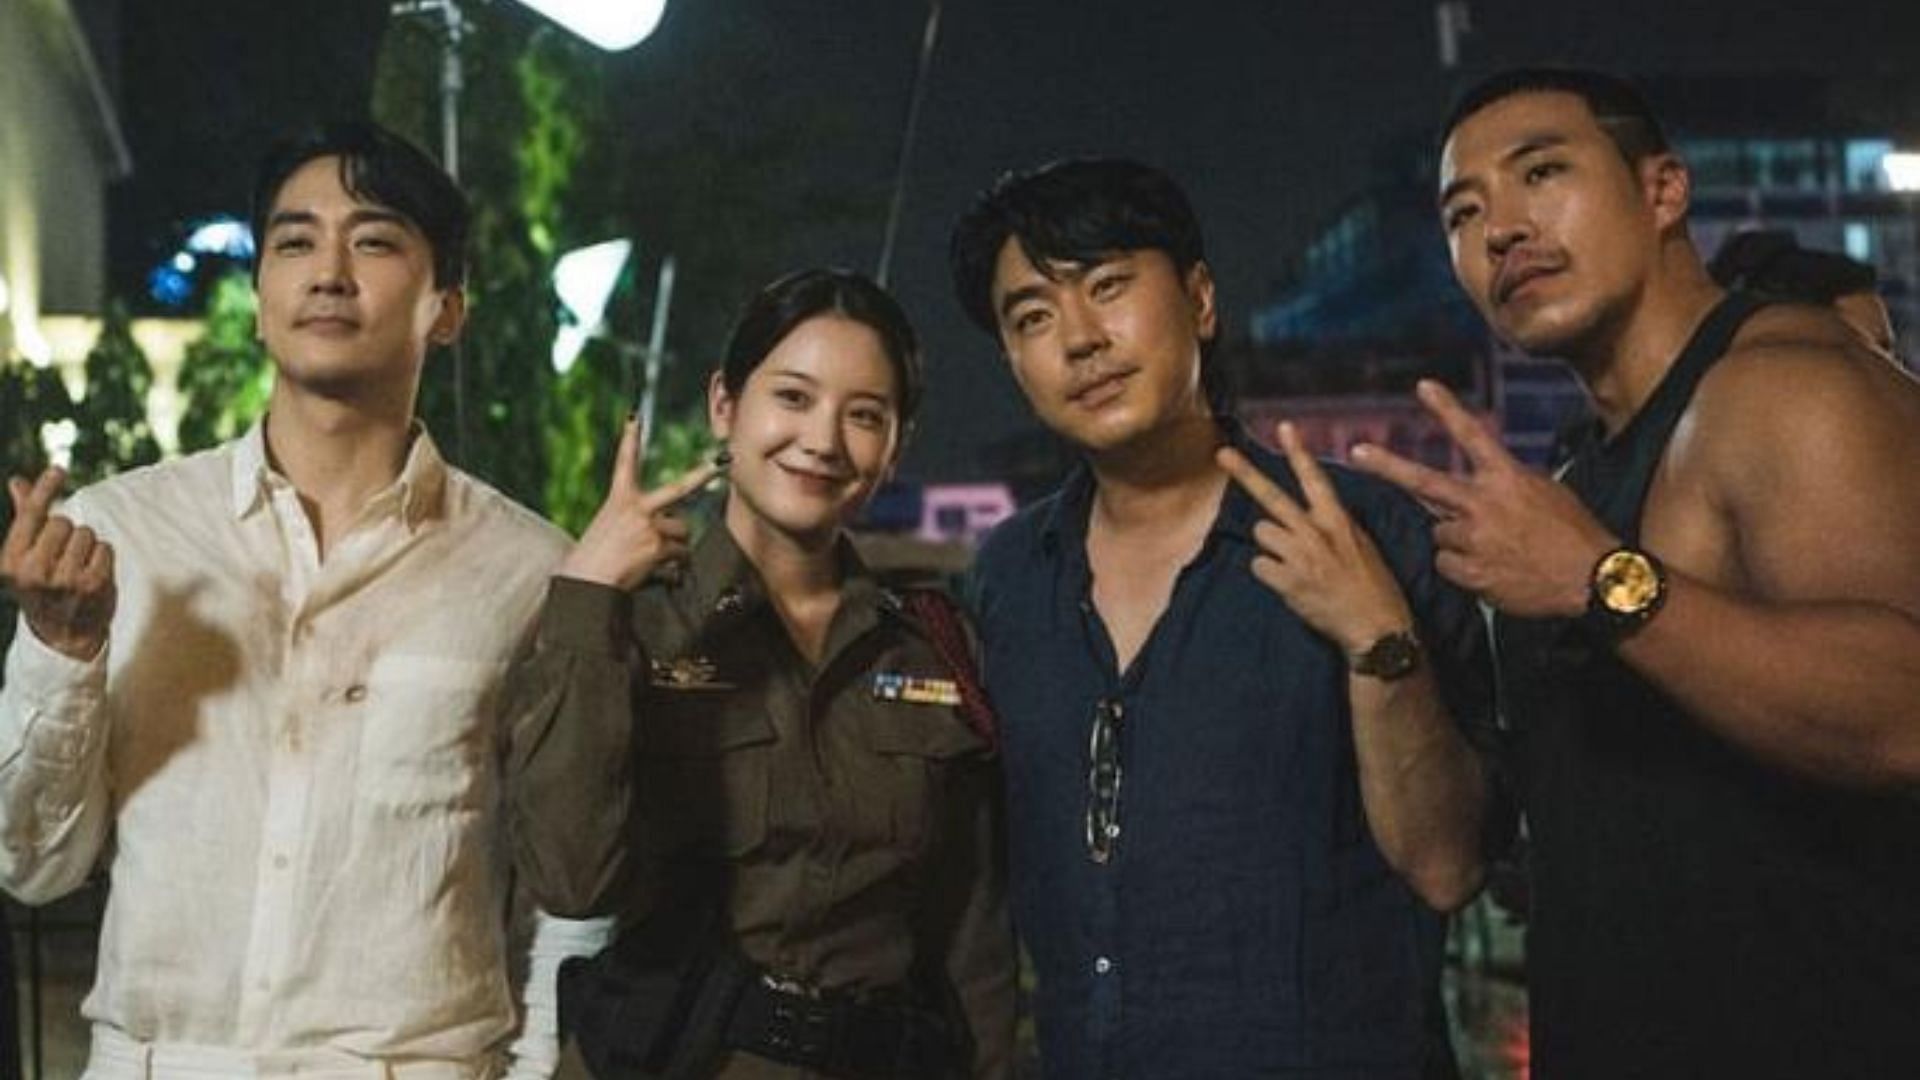 The Player 2: Master of Swindlers, featuring Ha-ri and his team (Image via Instagram/@tvndrama)